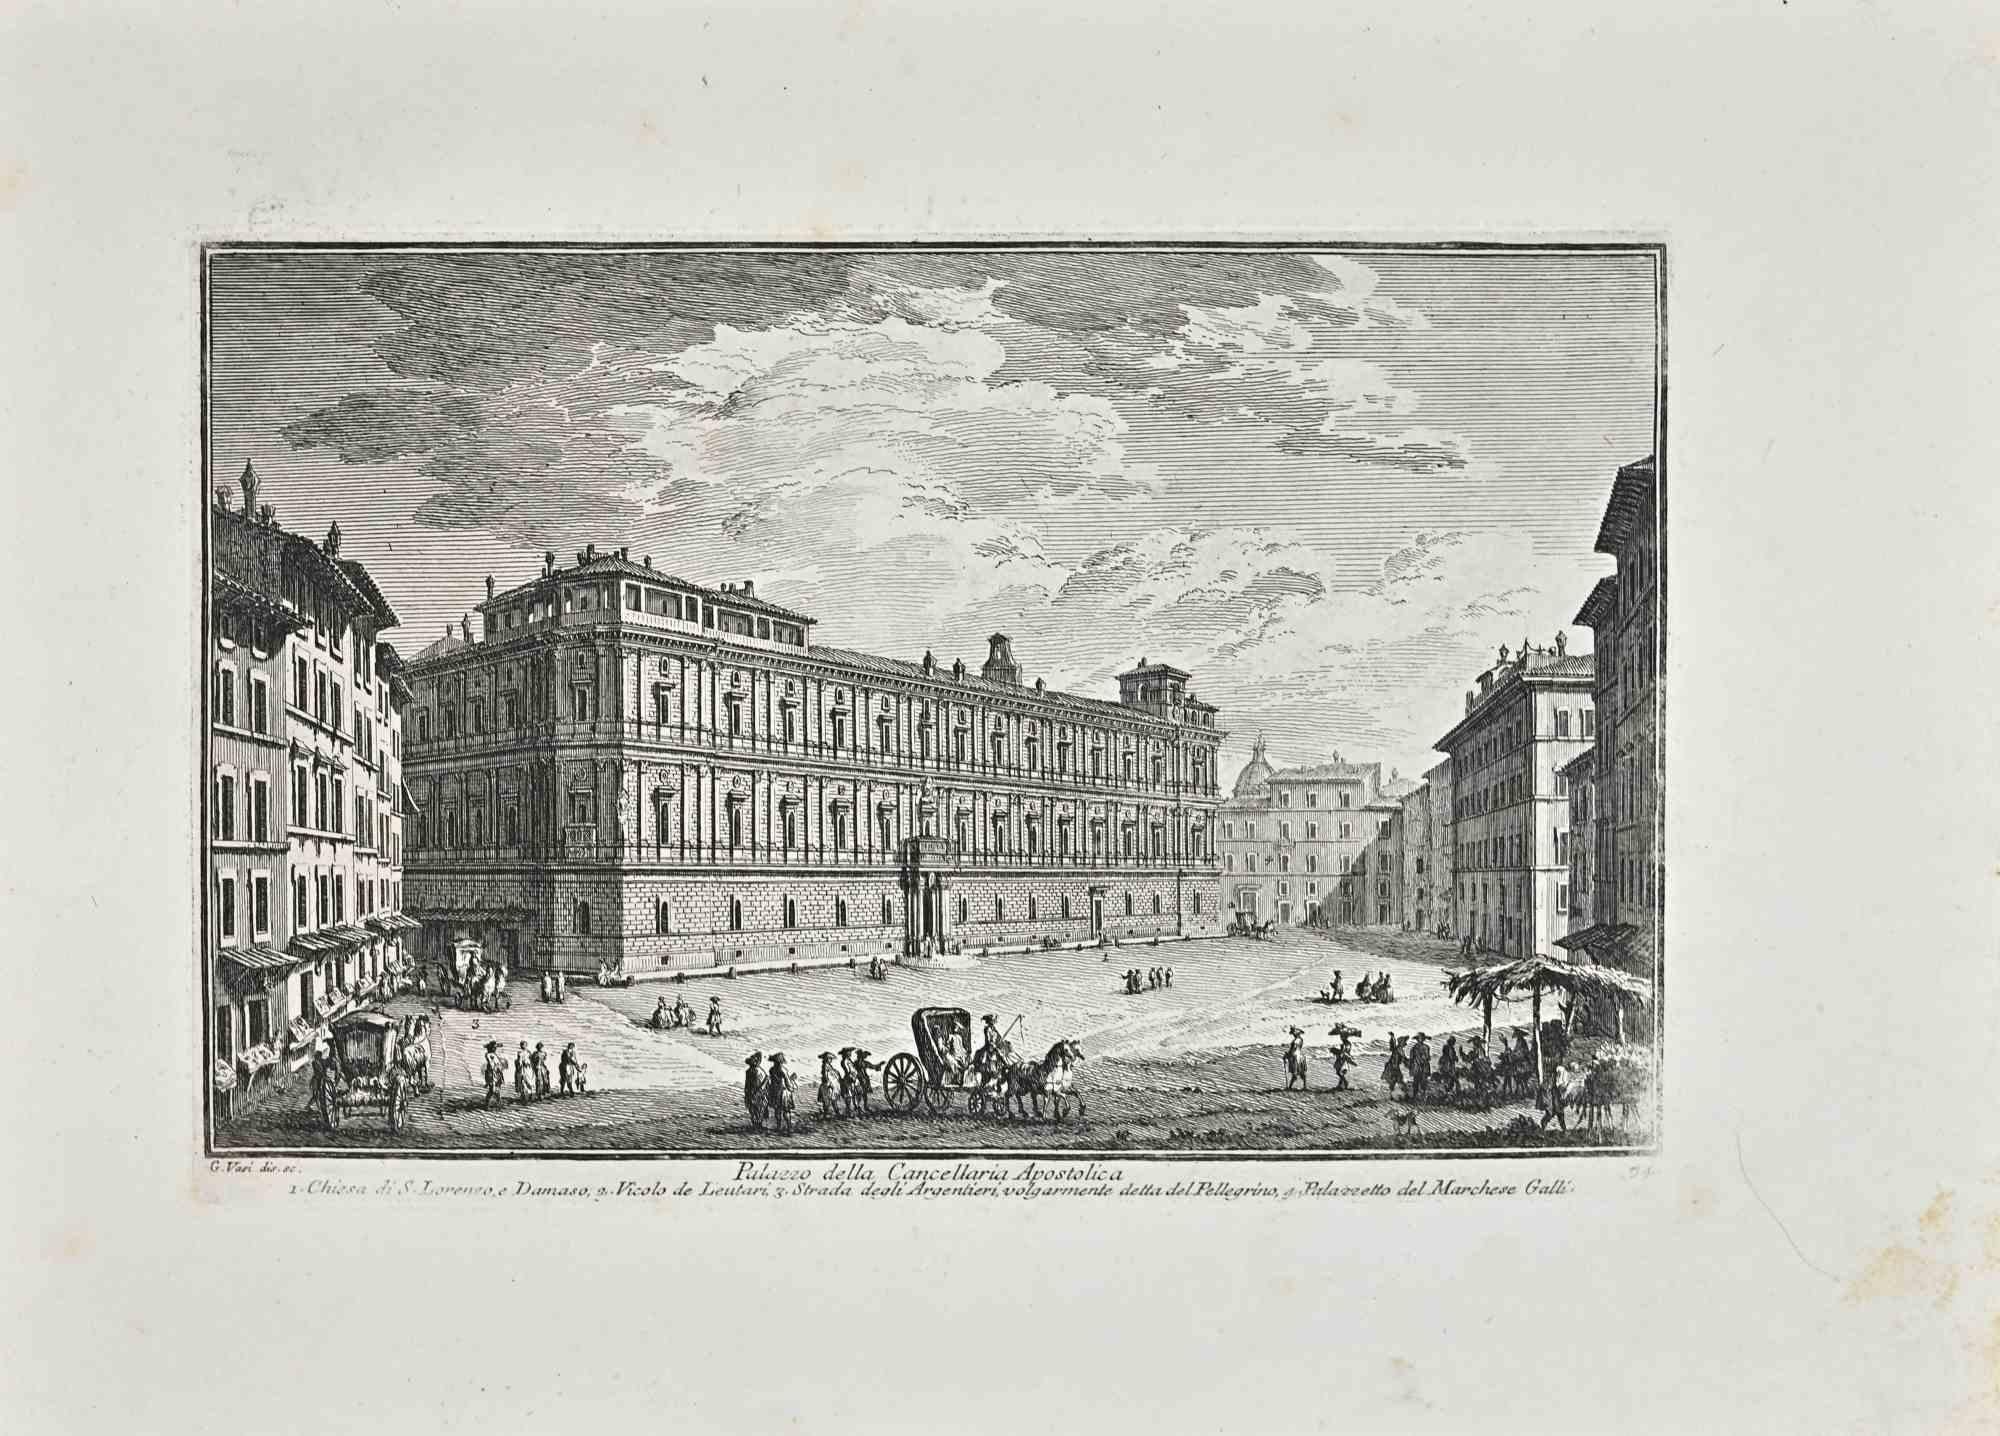 Palazzo della Cancelleria Apostolica is an original etching of the Late 18th century realized by Giuseppe Vasi.

Signed and titled on plate lower margin. 

Good conditions.

Giuseppe Vasi  (Corleone,1710 - Rome, 1782) was an engraver, architect, and